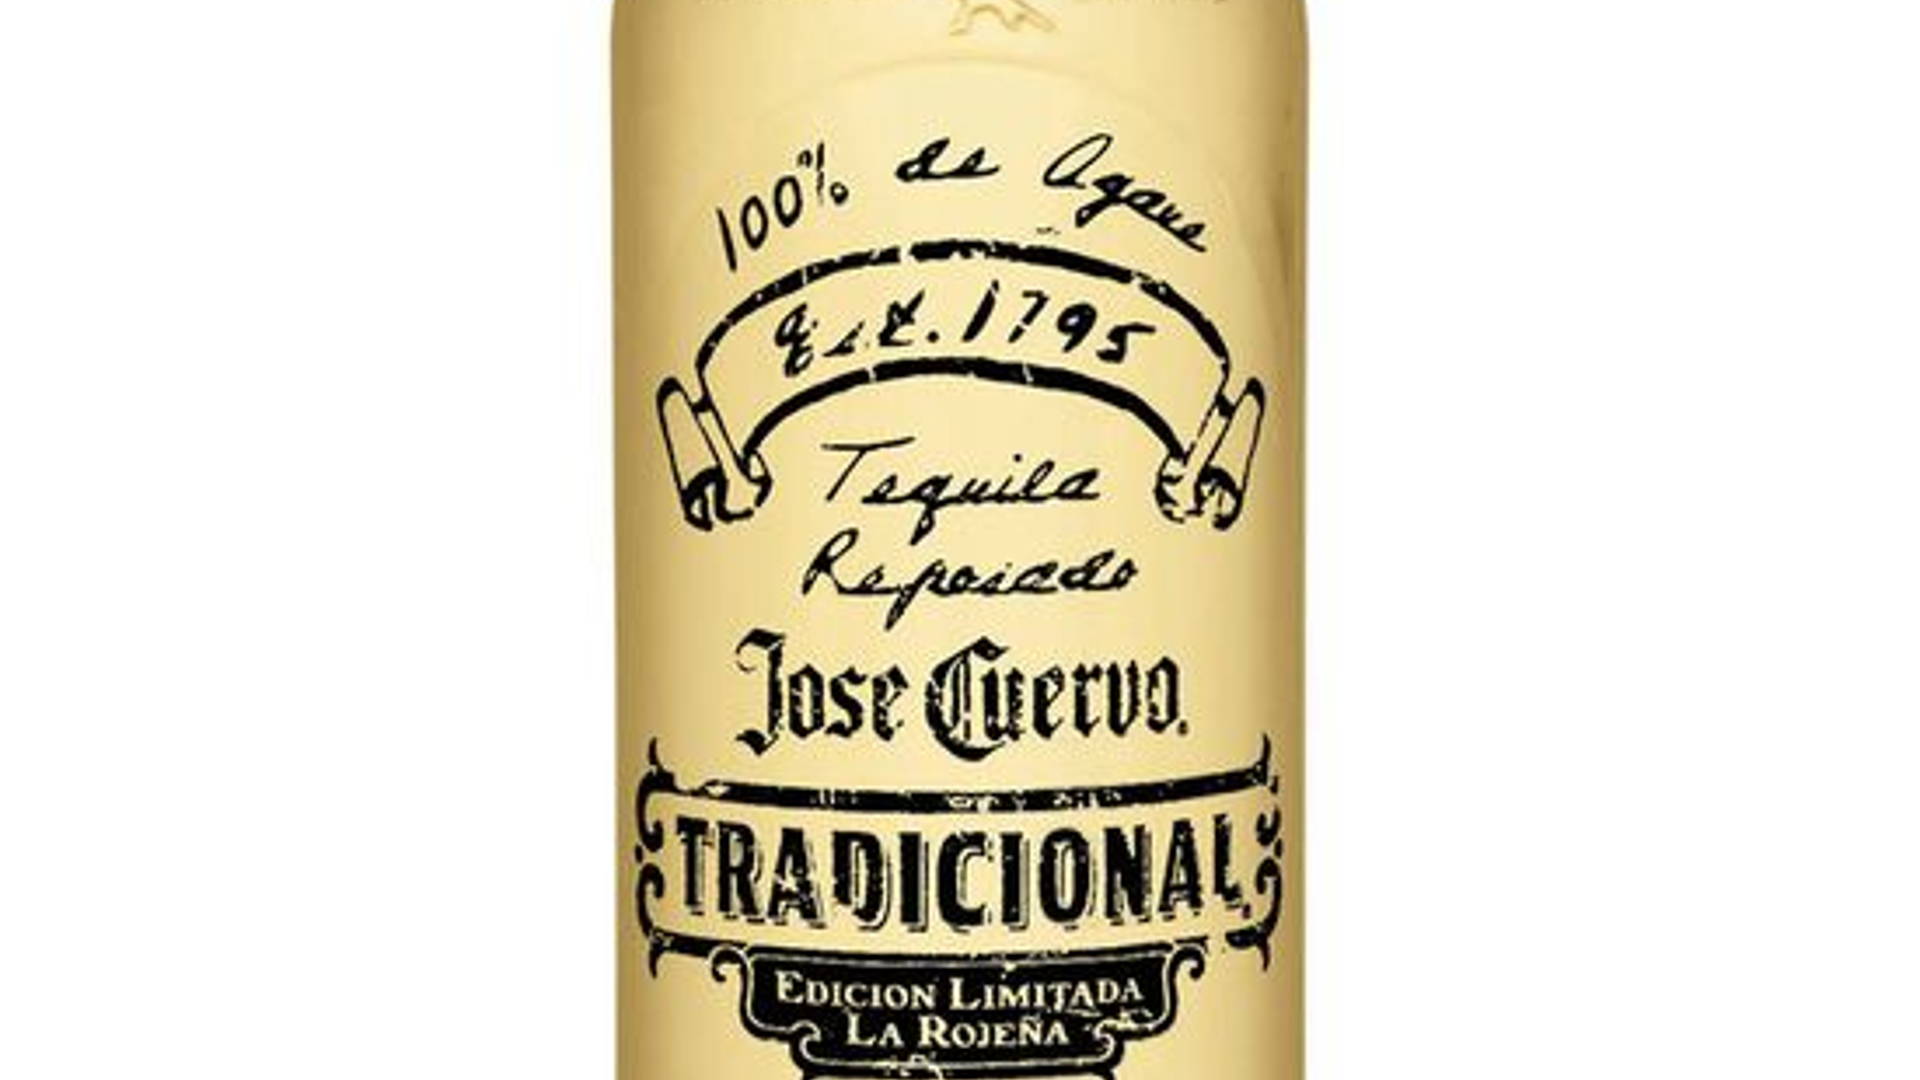 Featured image for Jose Cuervo Tradicional Limited Edition